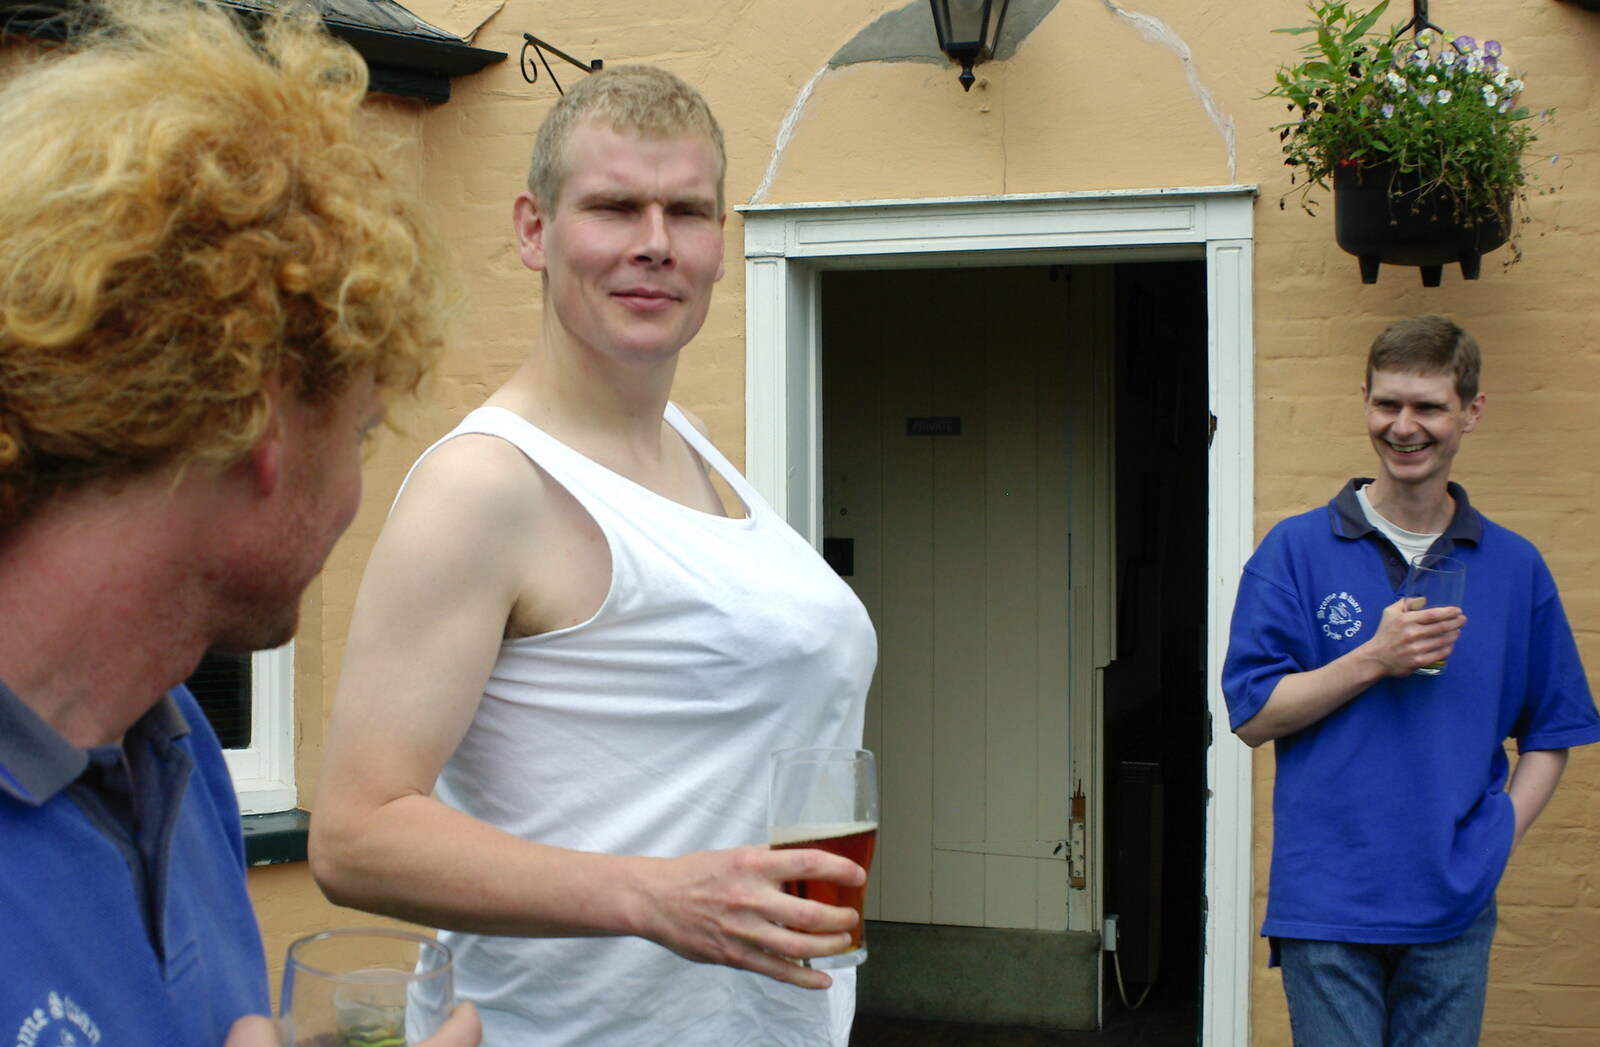 Bill pretends to have breasts (again) from The BSCC Charity Bike Ride, Walberswick, Suffolk - 9th July 2005